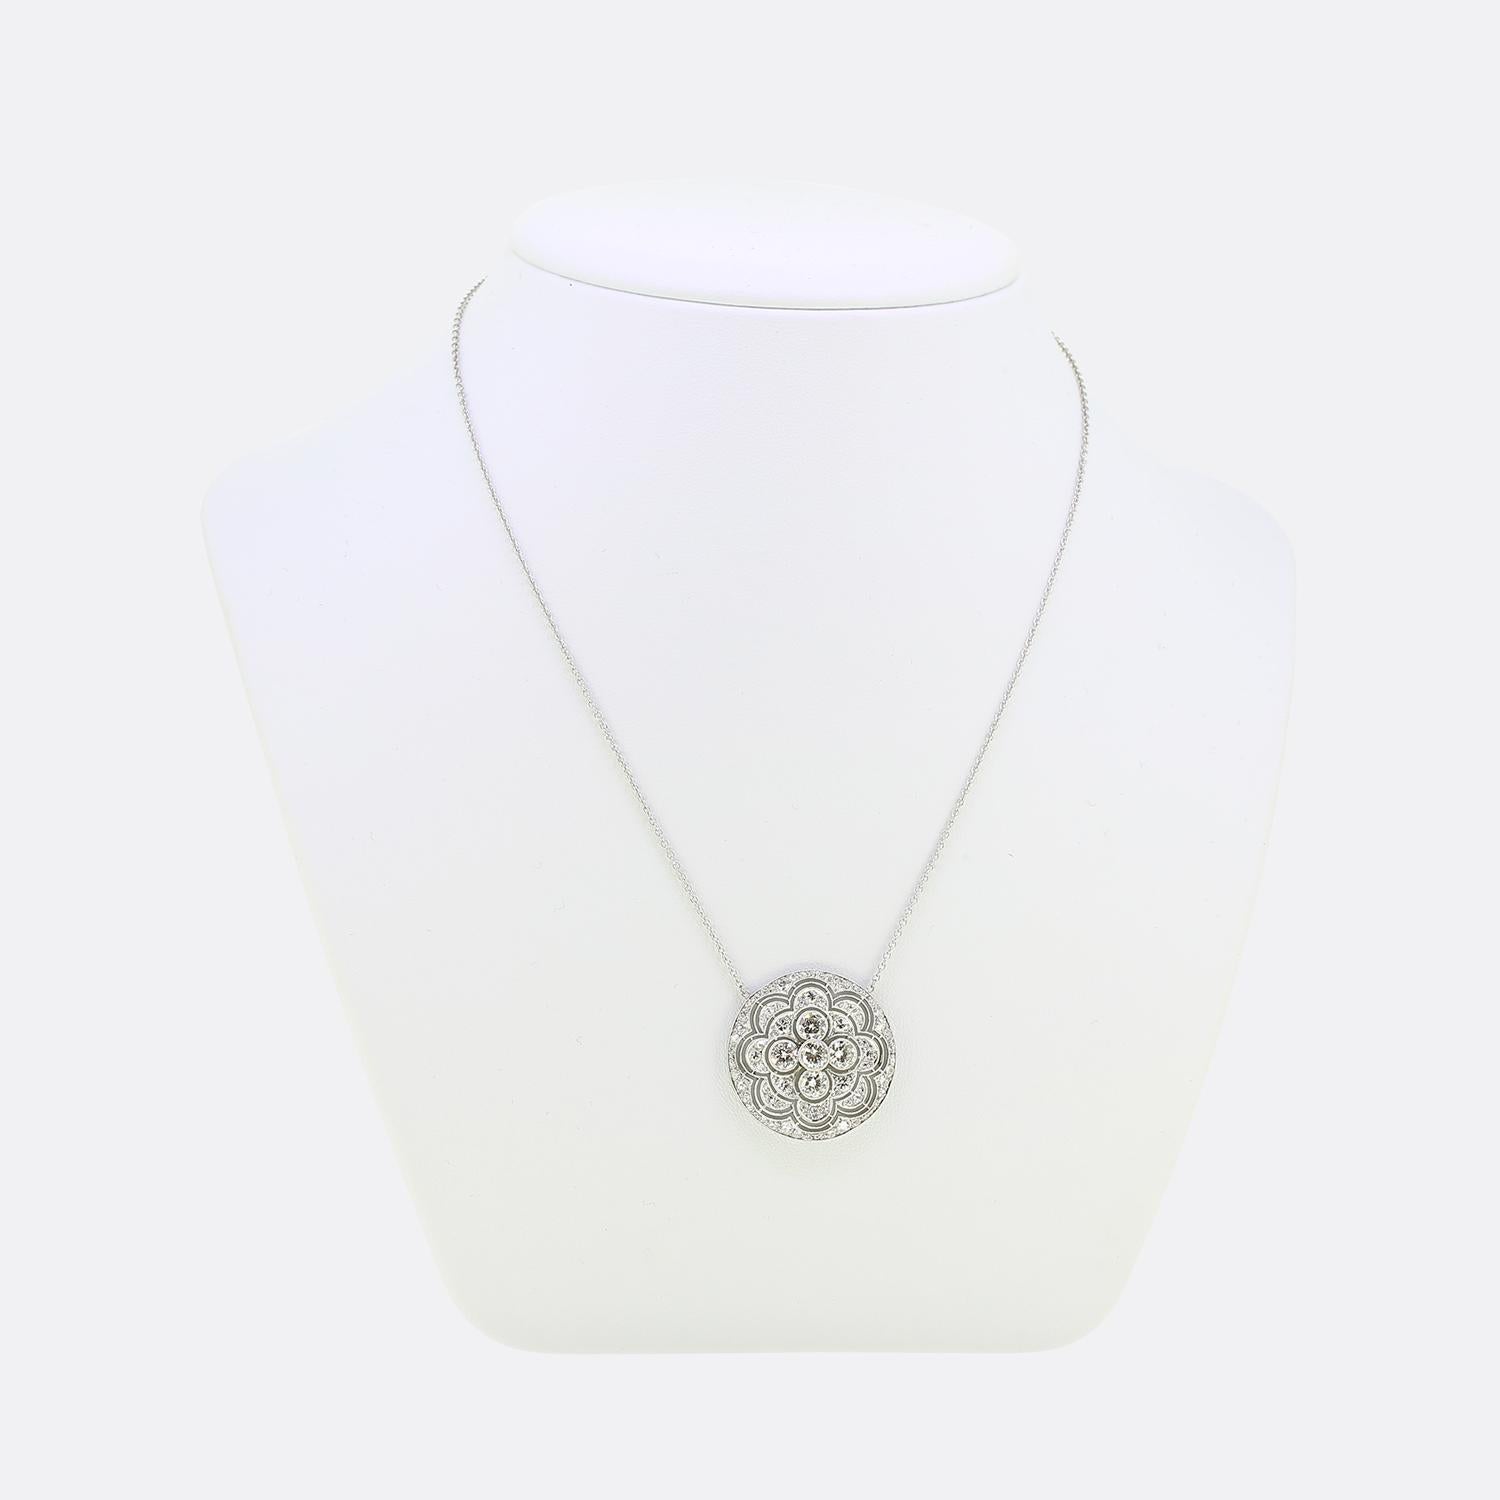 Here we have a delightful diamond necklace taken from the Art Deco movement. This geometric pendant has been crafted from platinum into a circular shape and features five round faceted transitional cut diamonds at the centre. The backdrop